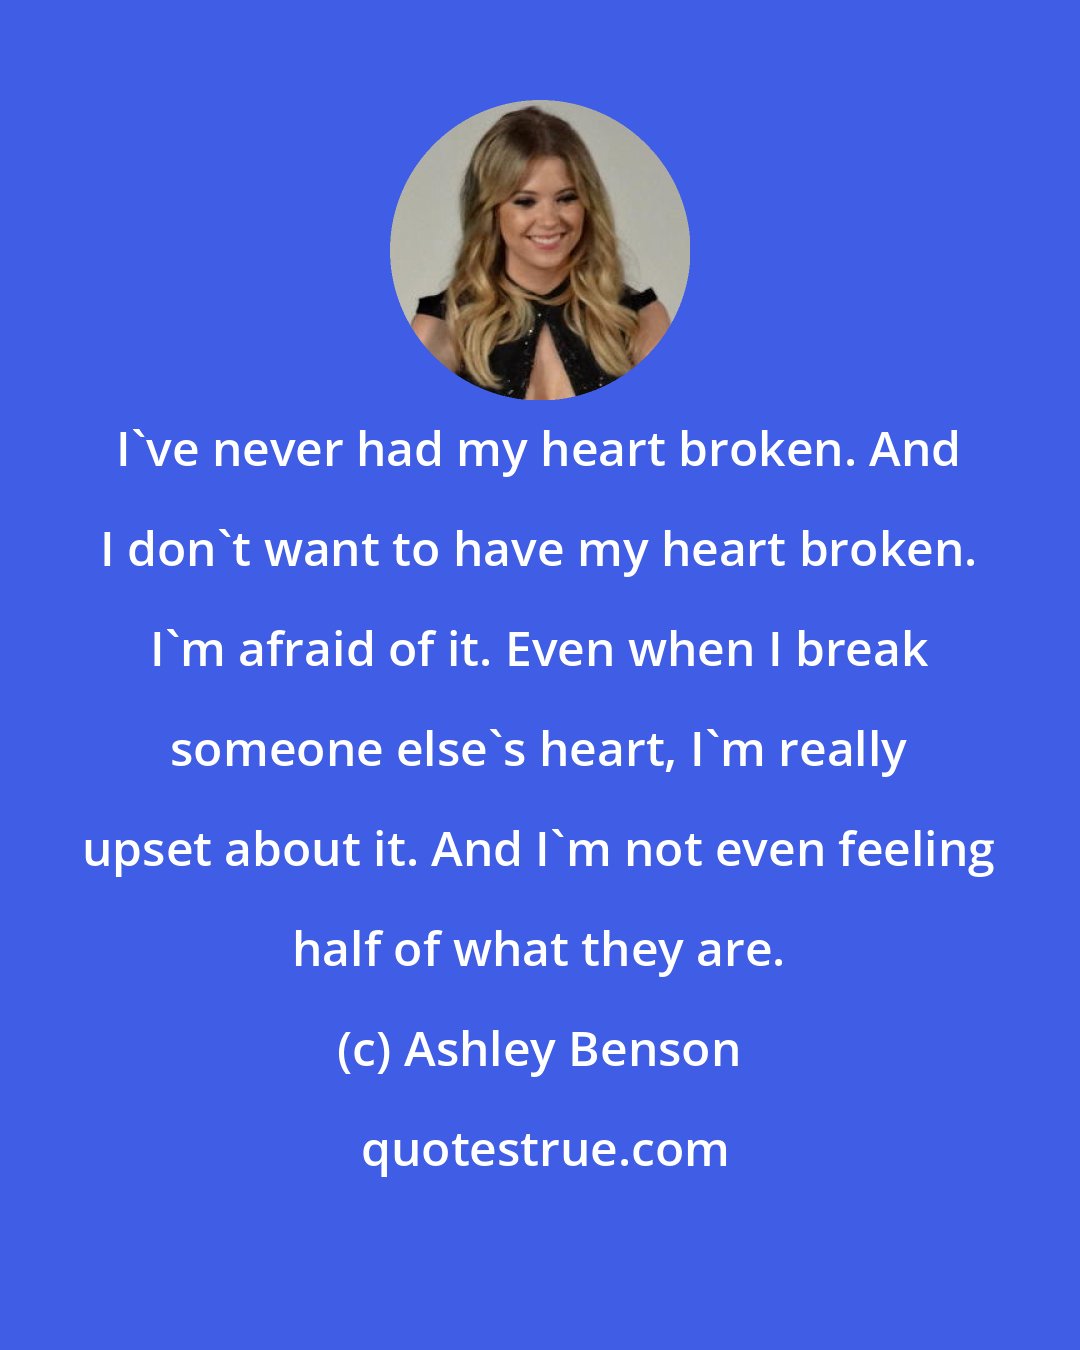 Ashley Benson: I've never had my heart broken. And I don't want to have my heart broken. I'm afraid of it. Even when I break someone else's heart, I'm really upset about it. And I'm not even feeling half of what they are.